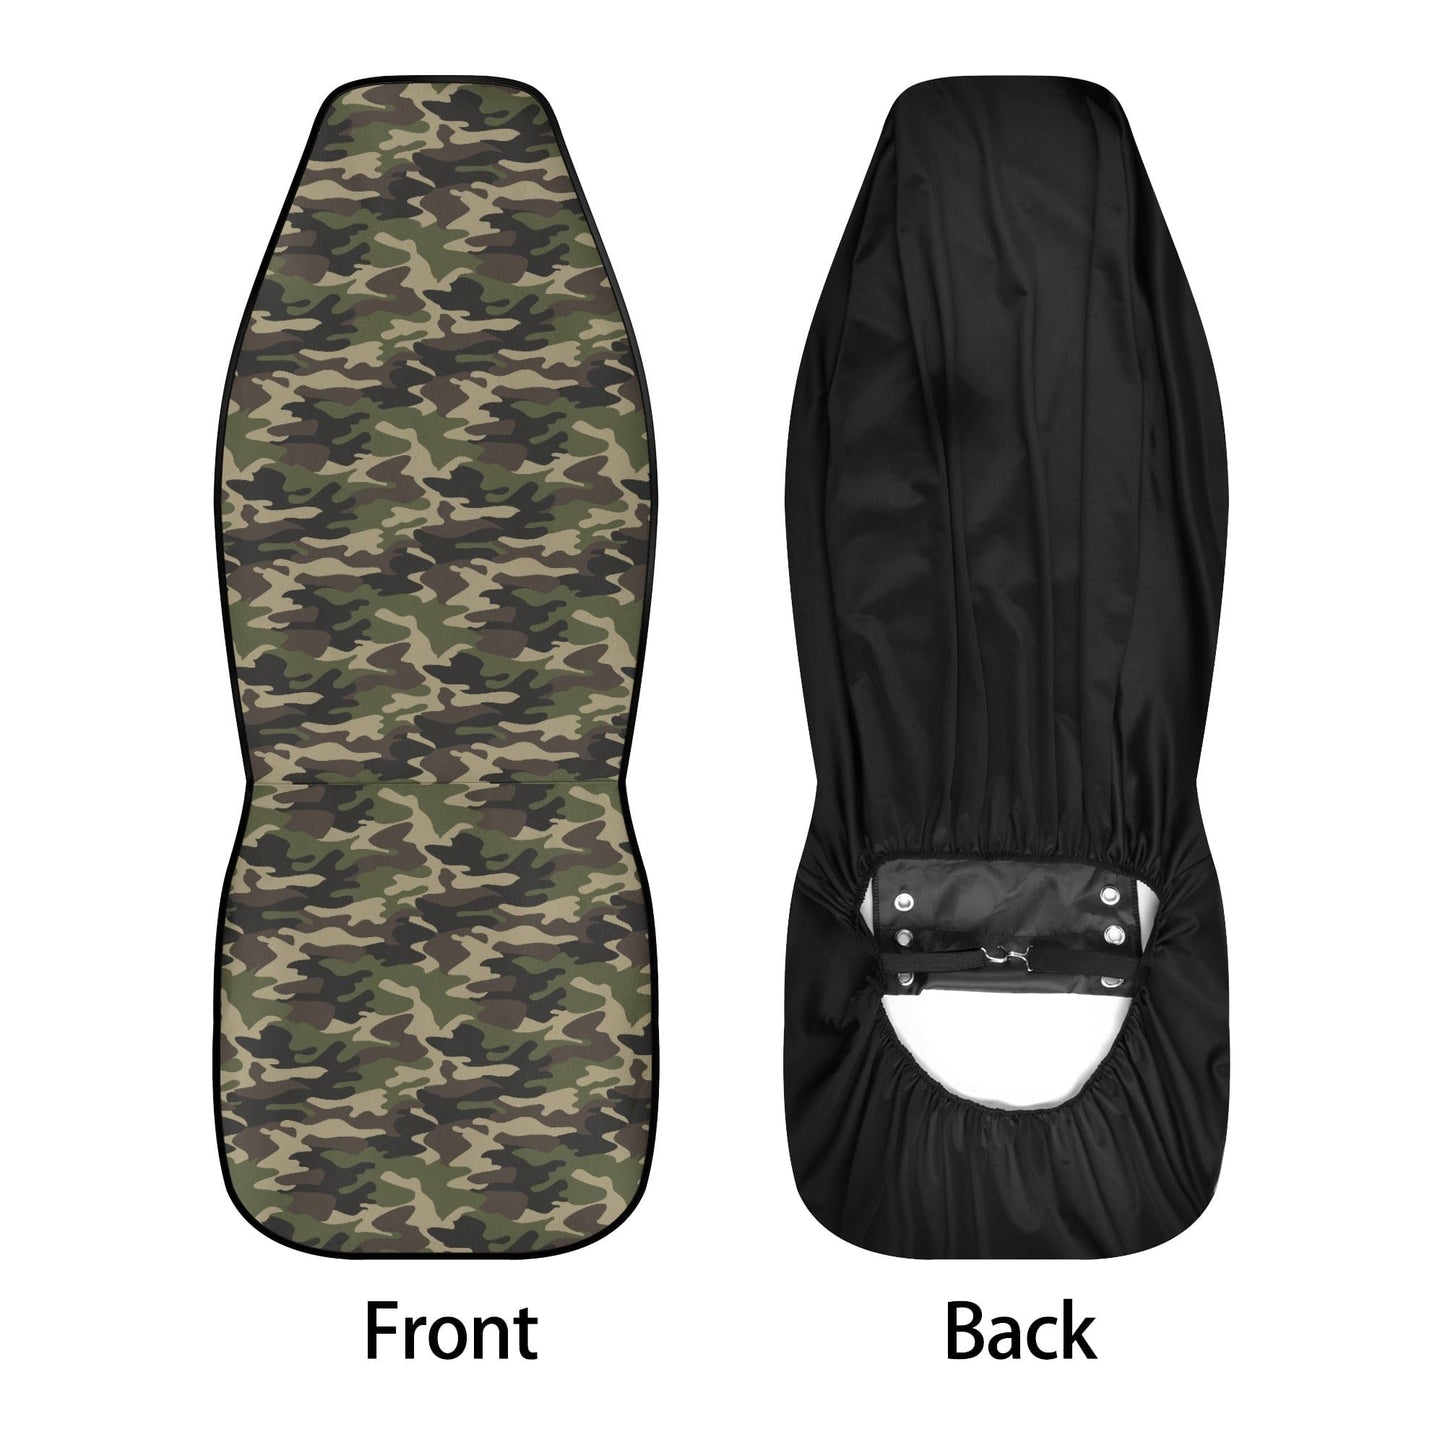 Camouflage Vehicle Seat Cover Set  popcustoms   